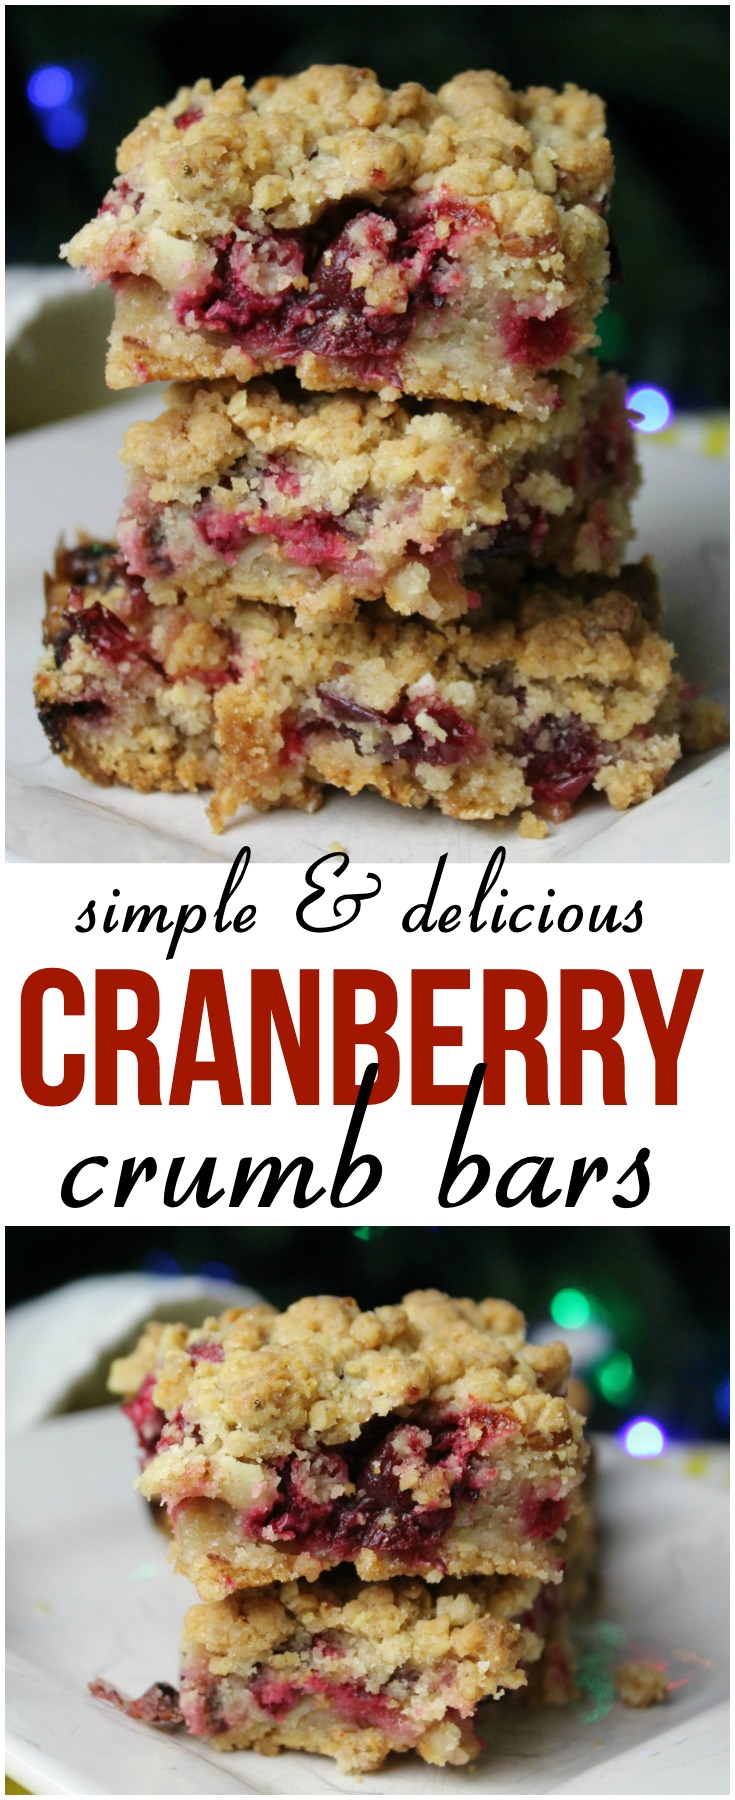 Easy Cranberry Crumb Bars | The CentsAble Shoppin